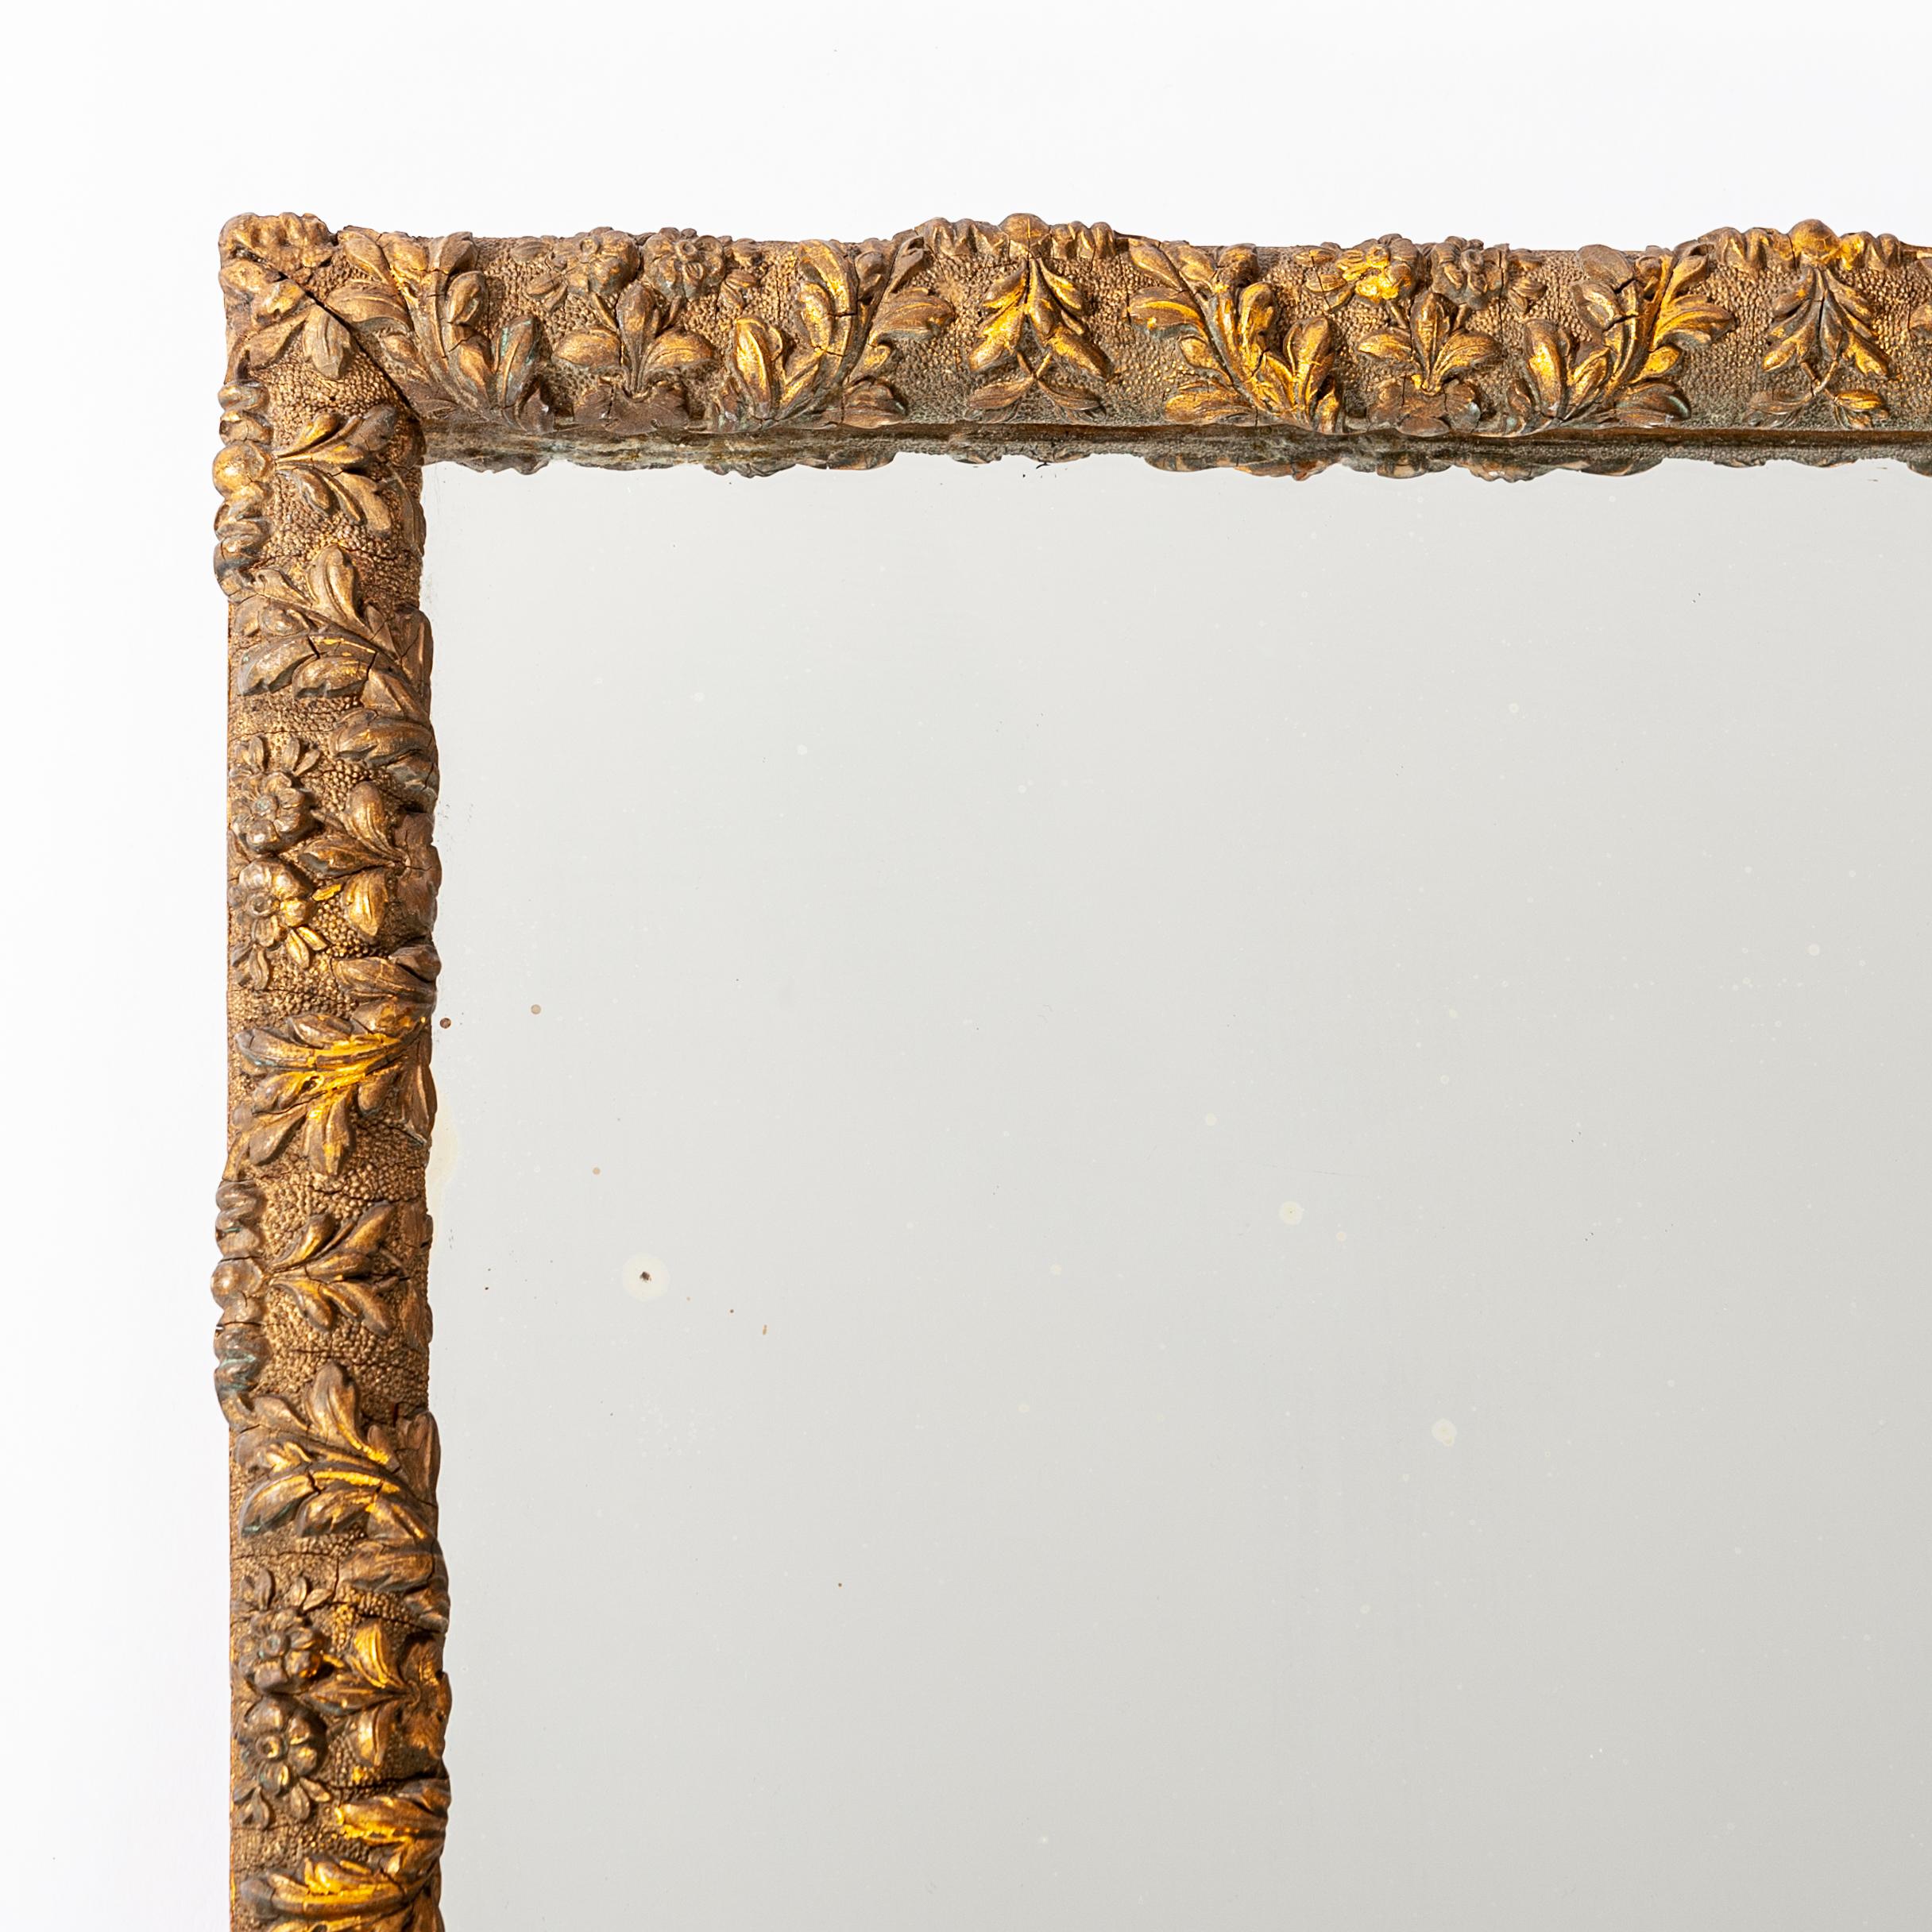 Very finely crafted mirror from the last third of the 19th century in France.
Wooden frame rounded gilded with very finely applied floral stucco, wonderful patina.
Original mercury glass and wooden back part.
  